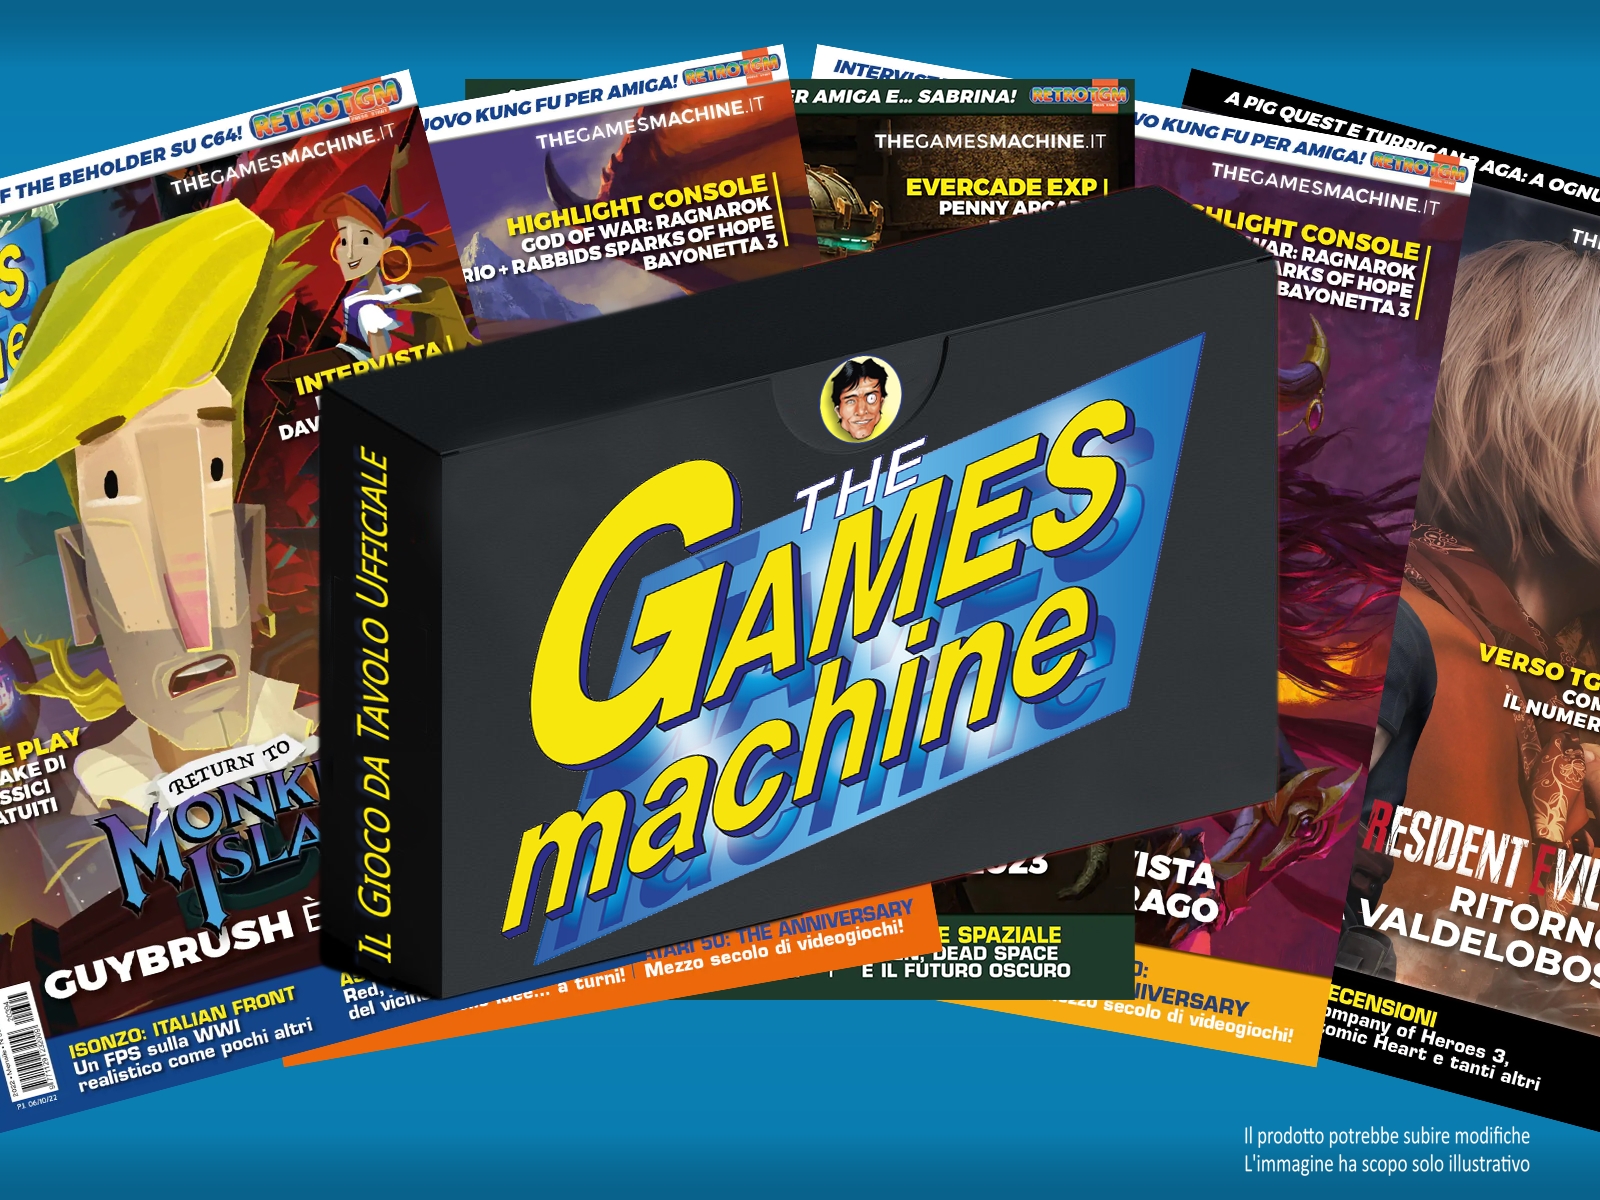 The Games Machine official board game